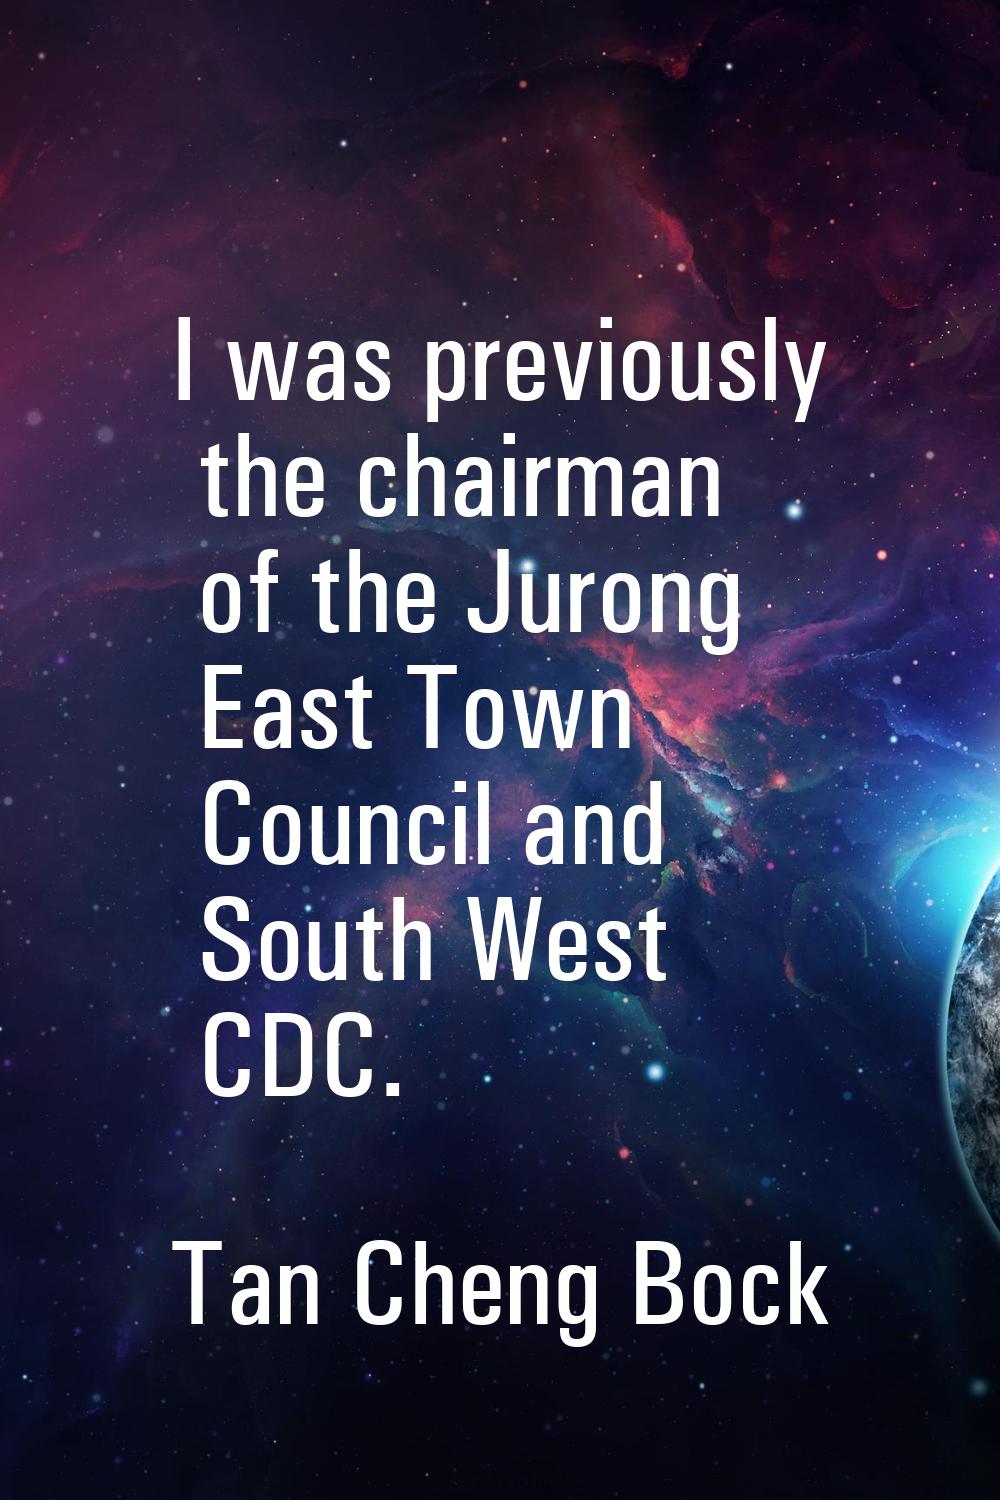 I was previously the chairman of the Jurong East Town Council and South West CDC.